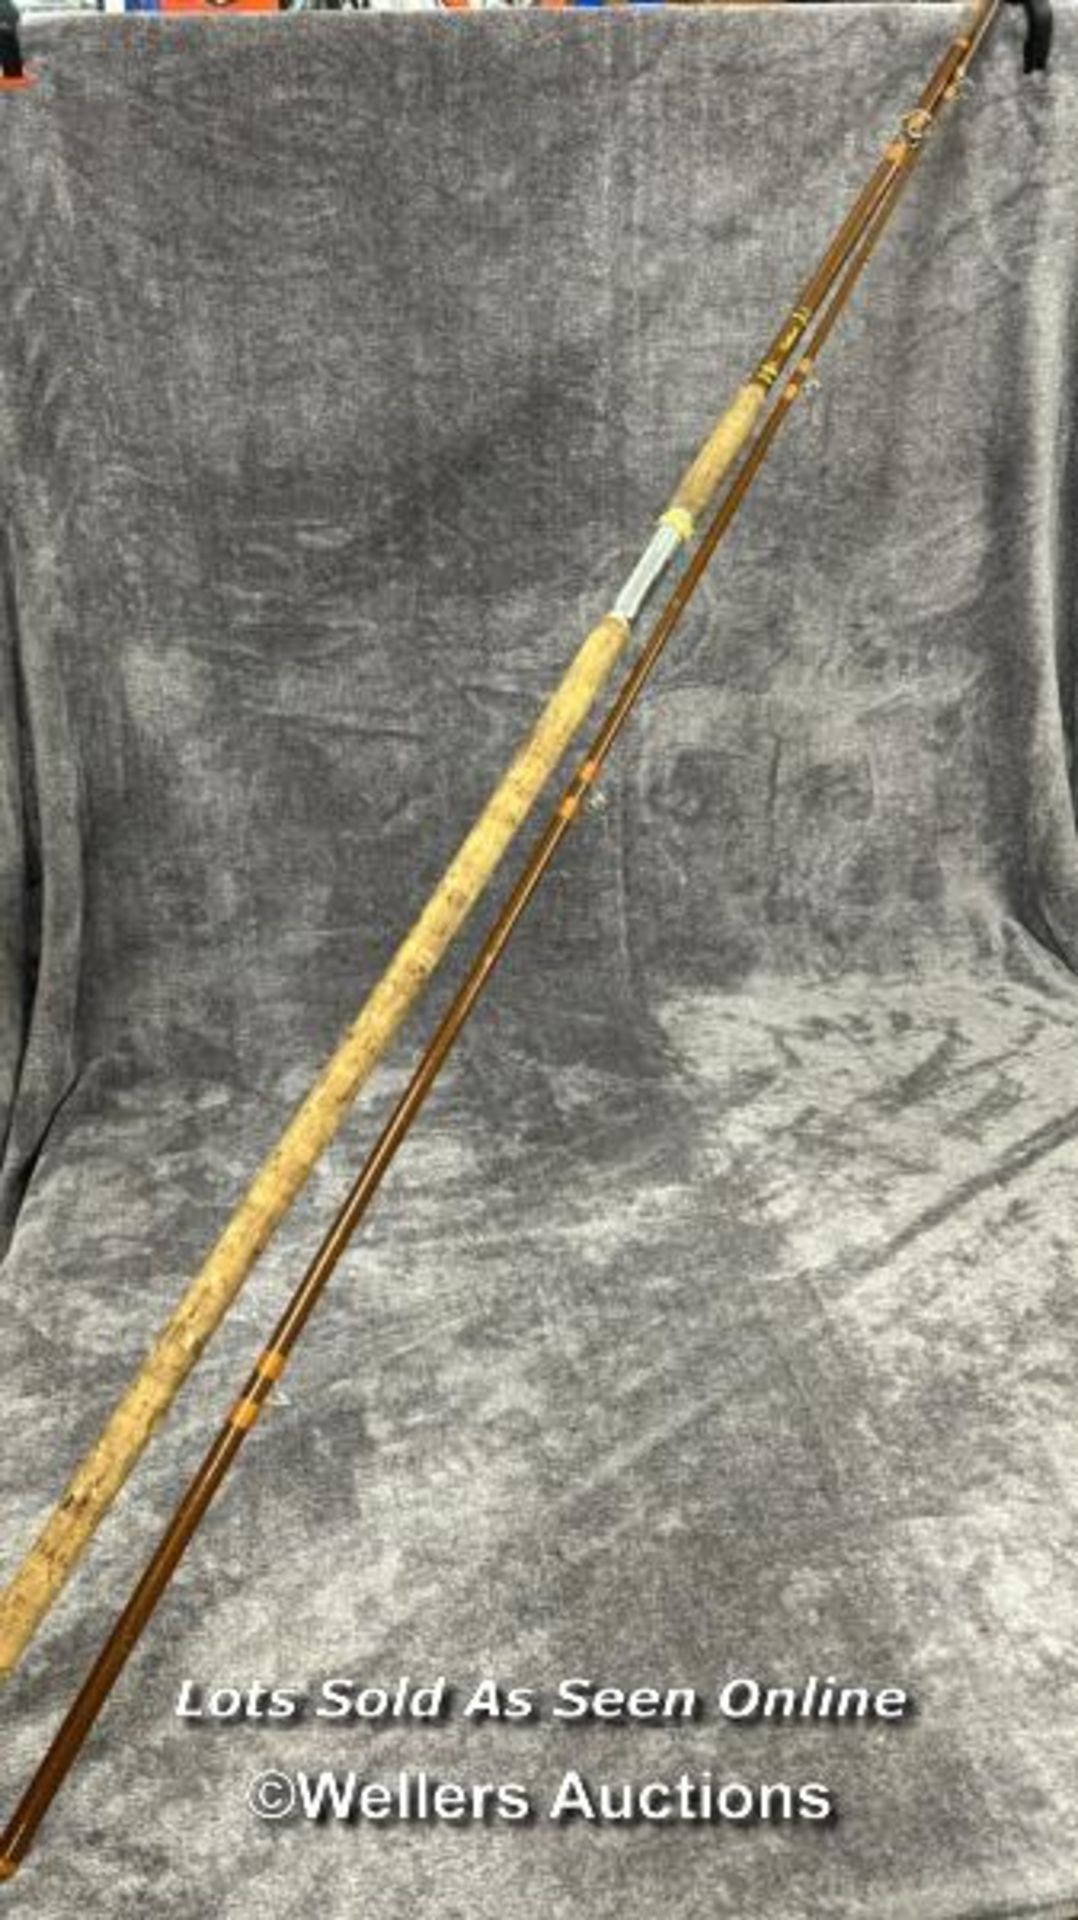 Vintage E.T. Barlow Vortex "Valiant" hand made beach casting fishing rod, 12ft long with case,